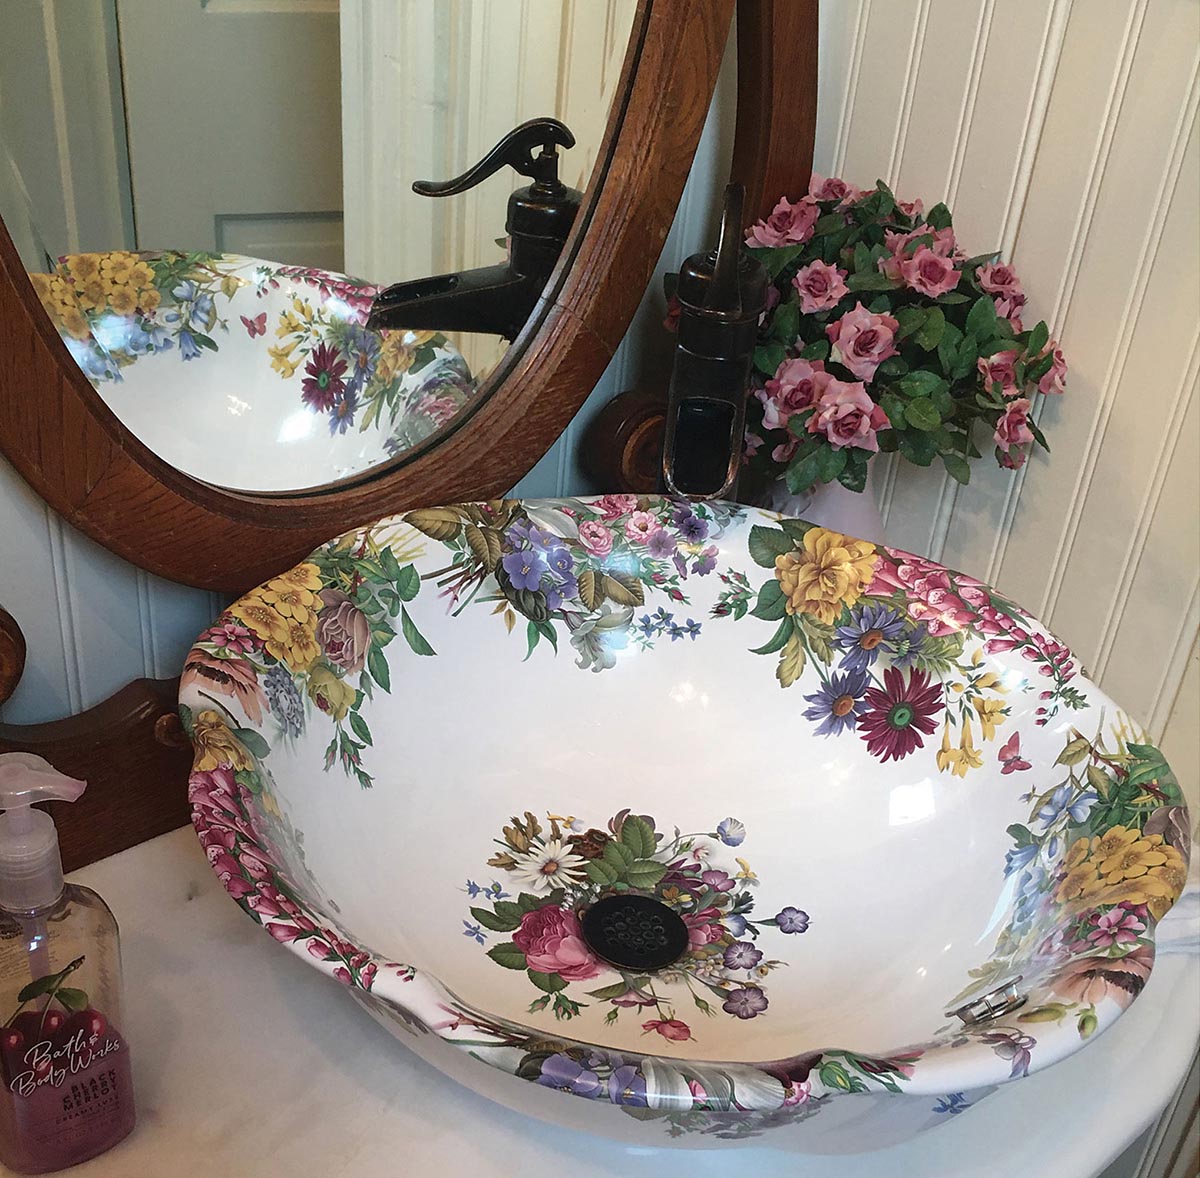 she-shed vessel sink painted with victorian garden flowers